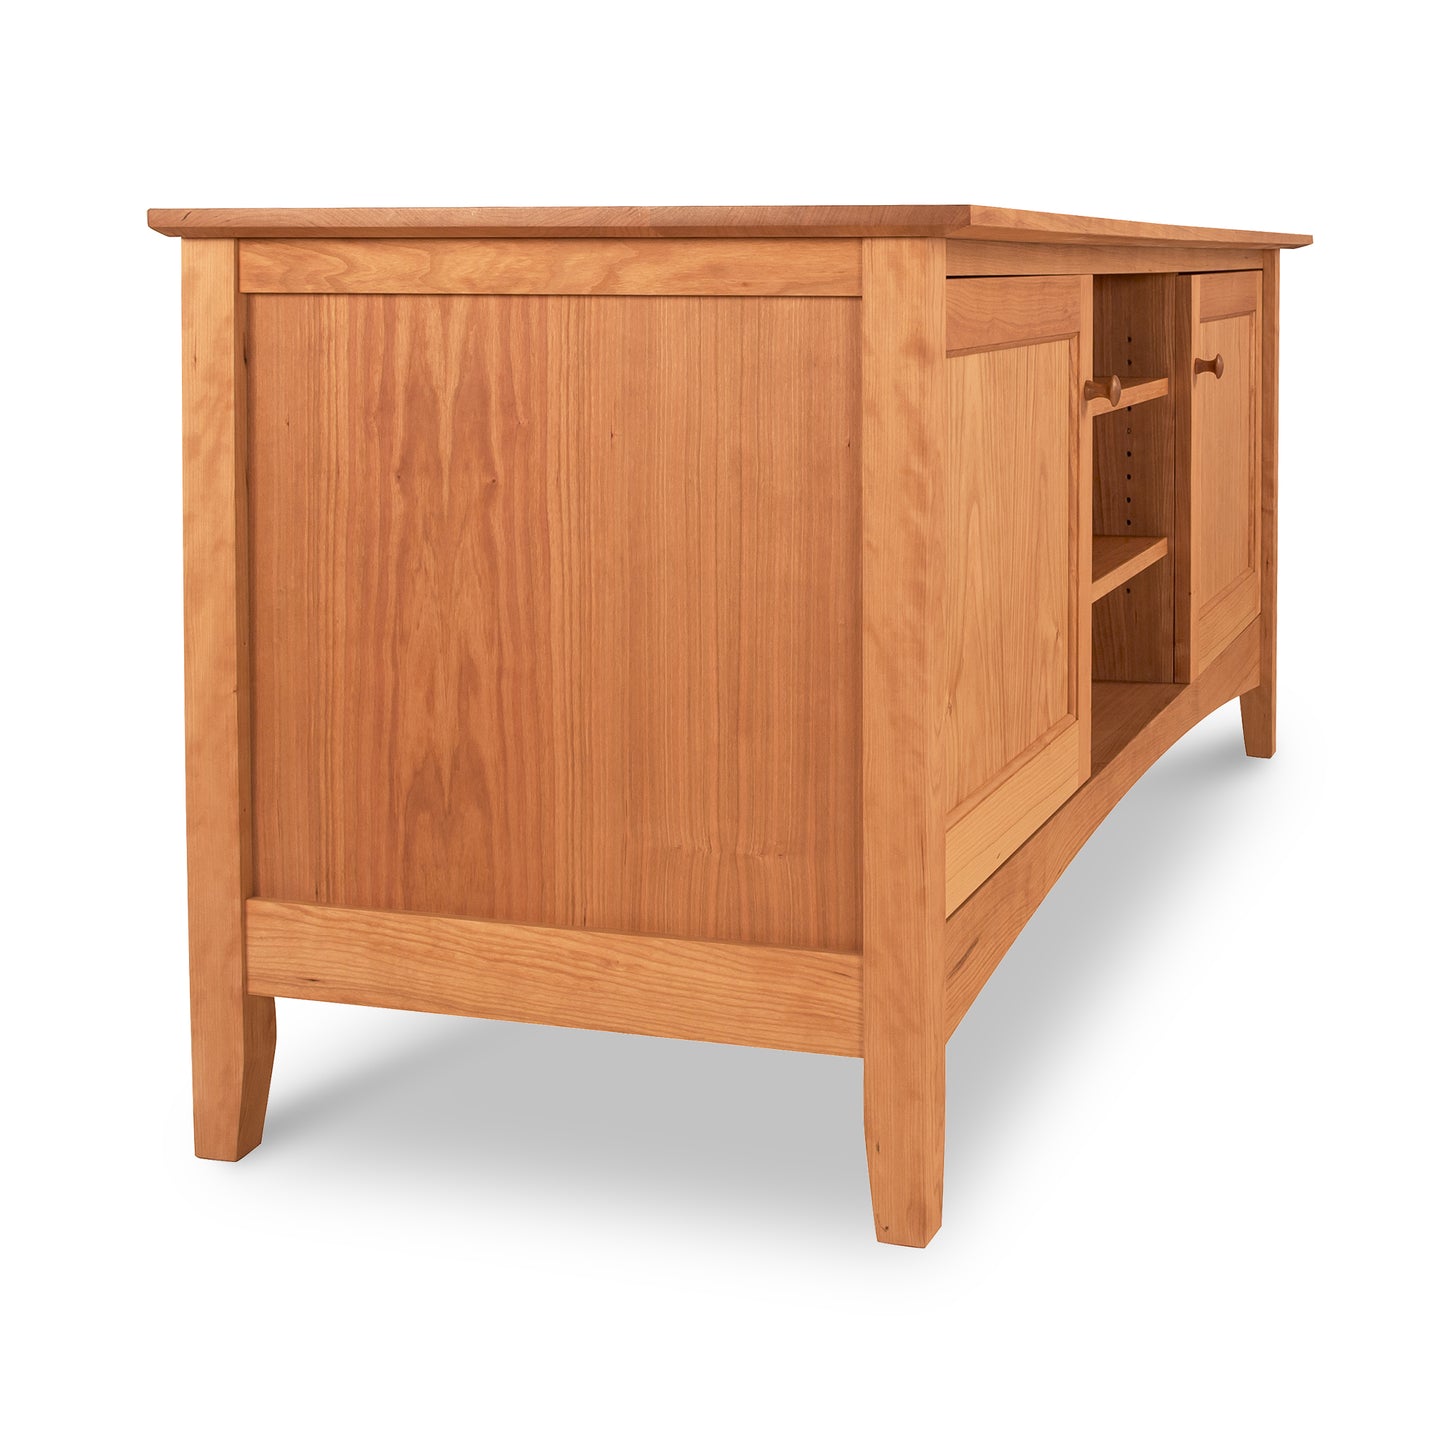 Maple Corner Woodworks American Shaker 67" TV Stand with cabinet doors partly open, revealing shelves inside, isolated on a white background, crafted from solid hardwoods.